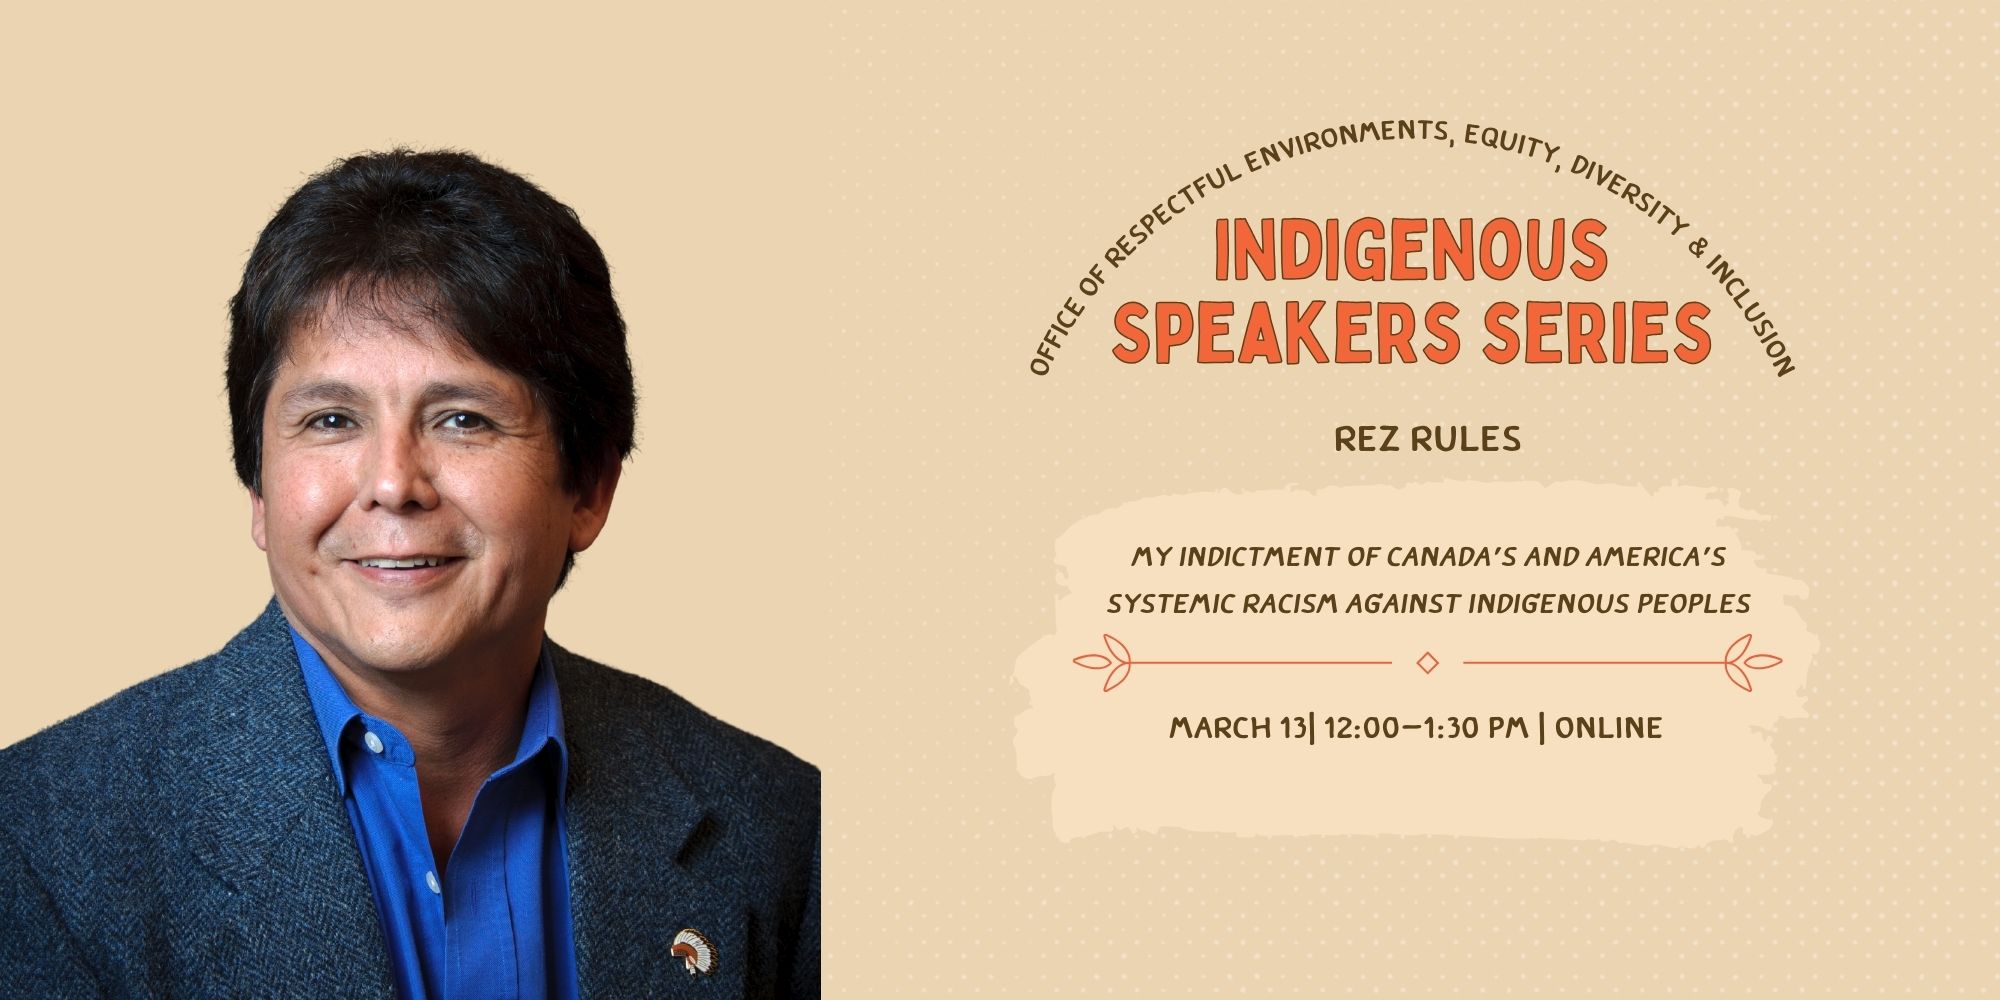 Faculty of Medicine REDI Office Indigenous Speaker Series presents: Rez Rules: My Indictment of Canada’s and America’s Systemic Racism Against Indigenous Peoples